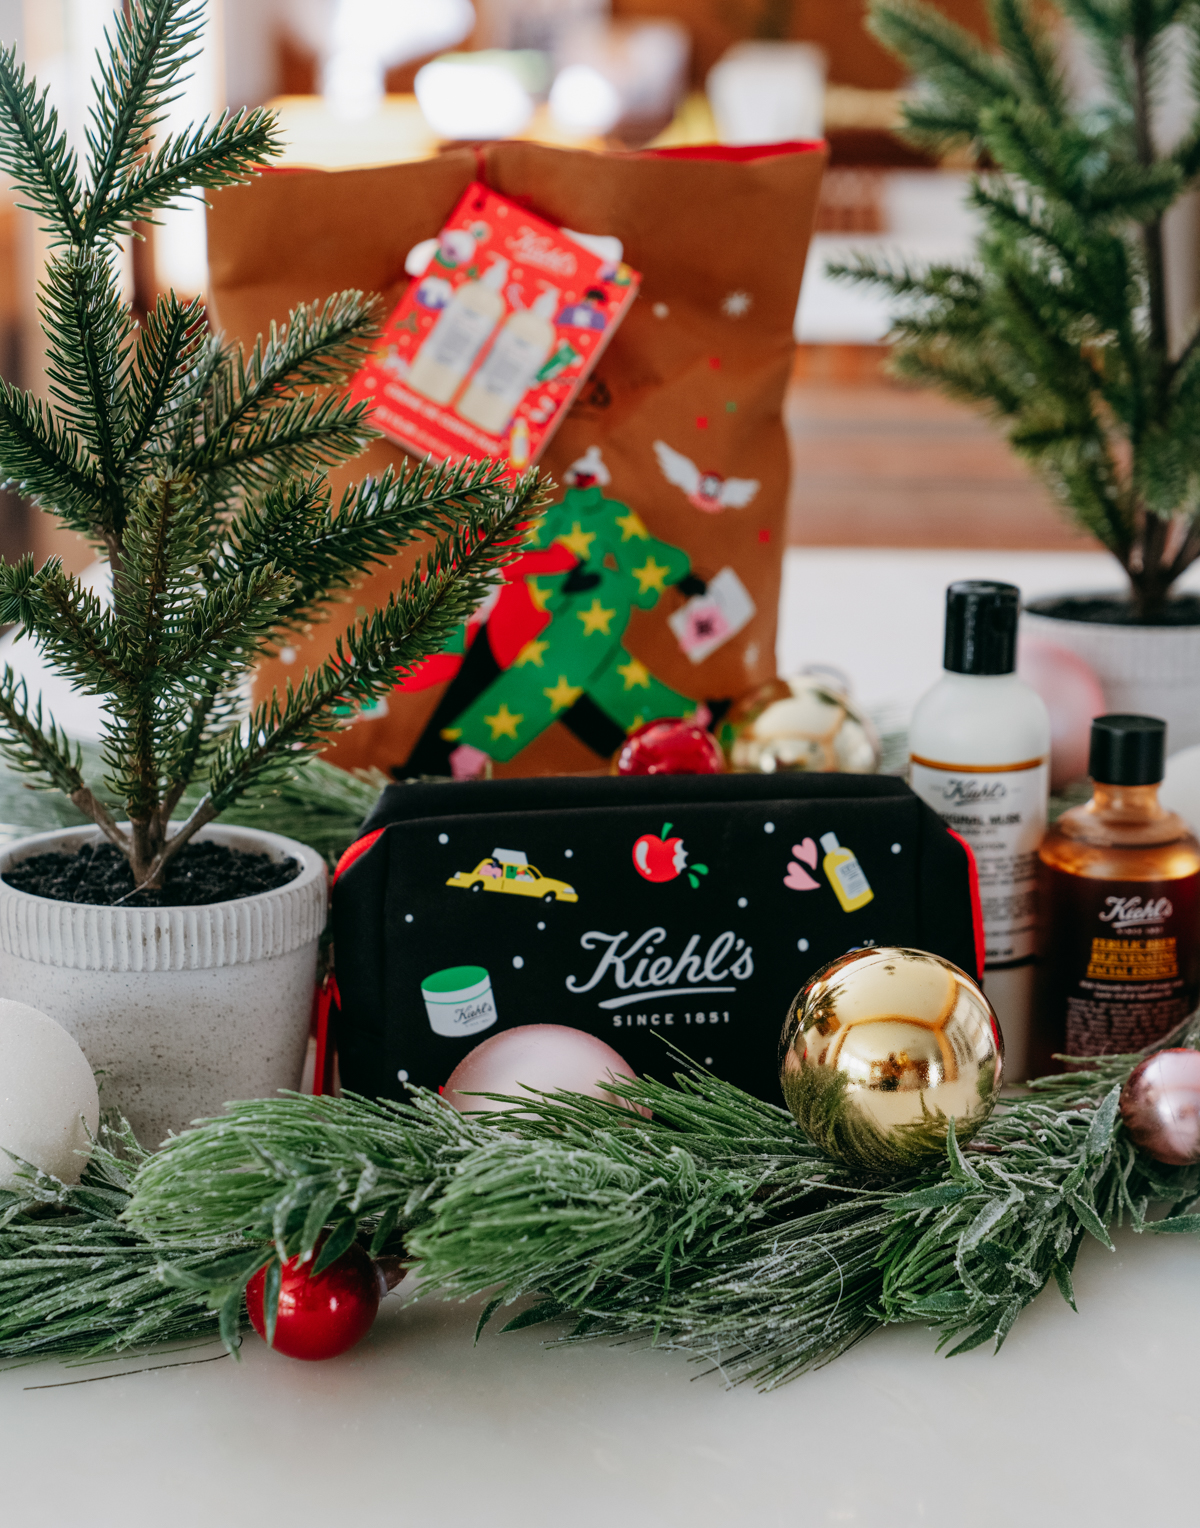 Kiehl’s Holiday Gifts